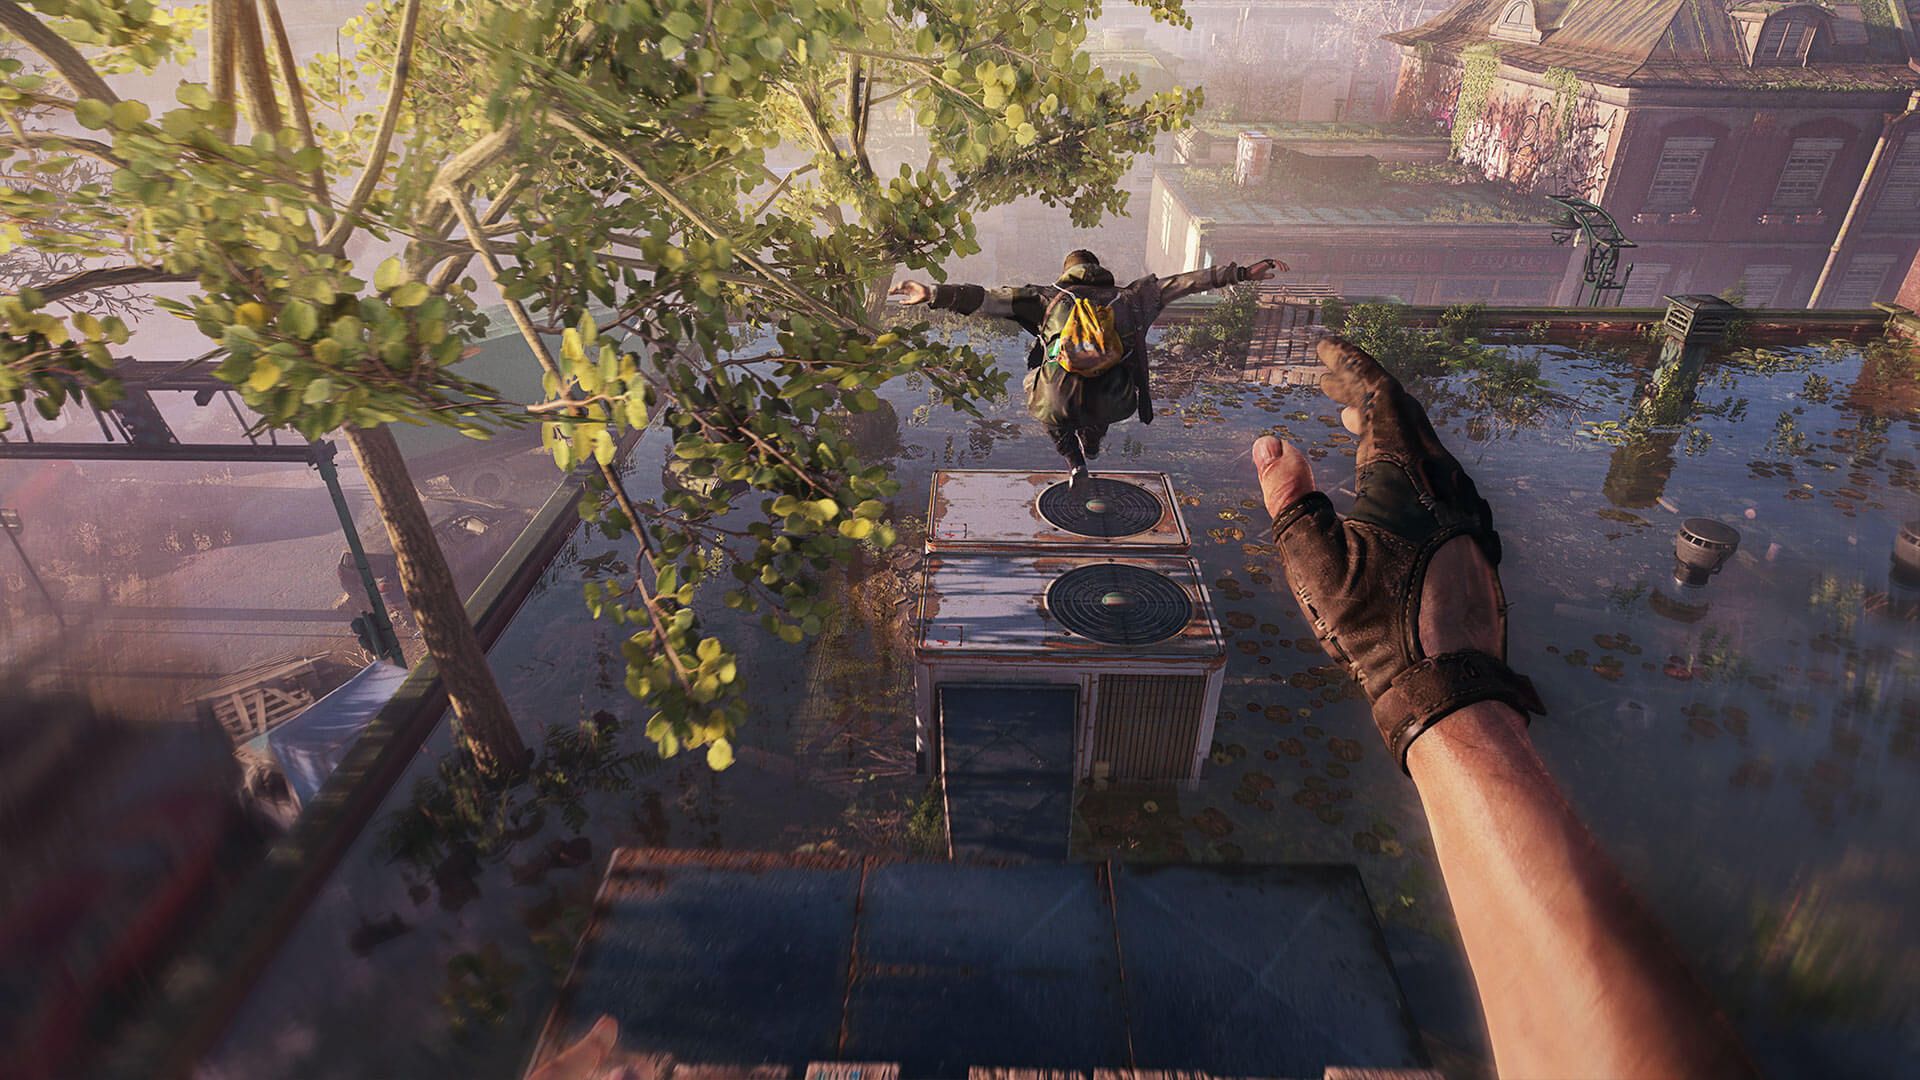 Video game screenshot that shows the arm of a person extending from the camera as the player's character leaps across a rooftop